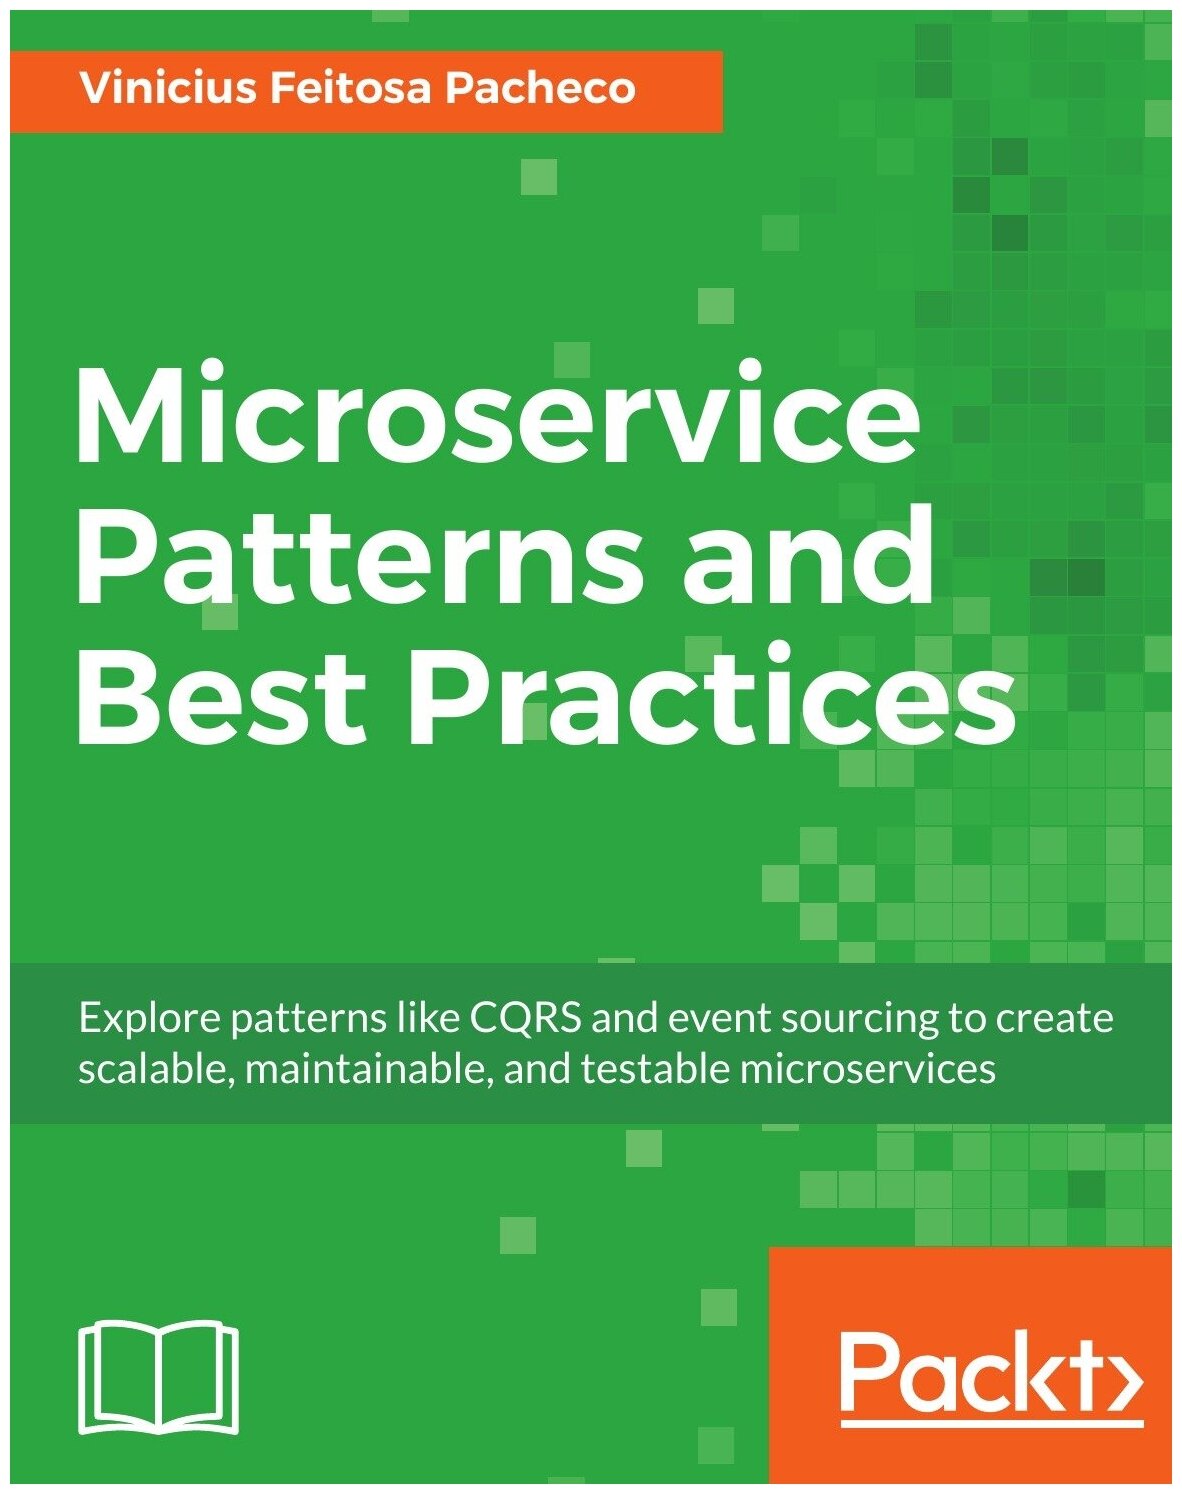 Microservice Patterns and Best Practices. Explore patterns like CQRS and event sourcing to create scalable, maintainable, and testable microservices